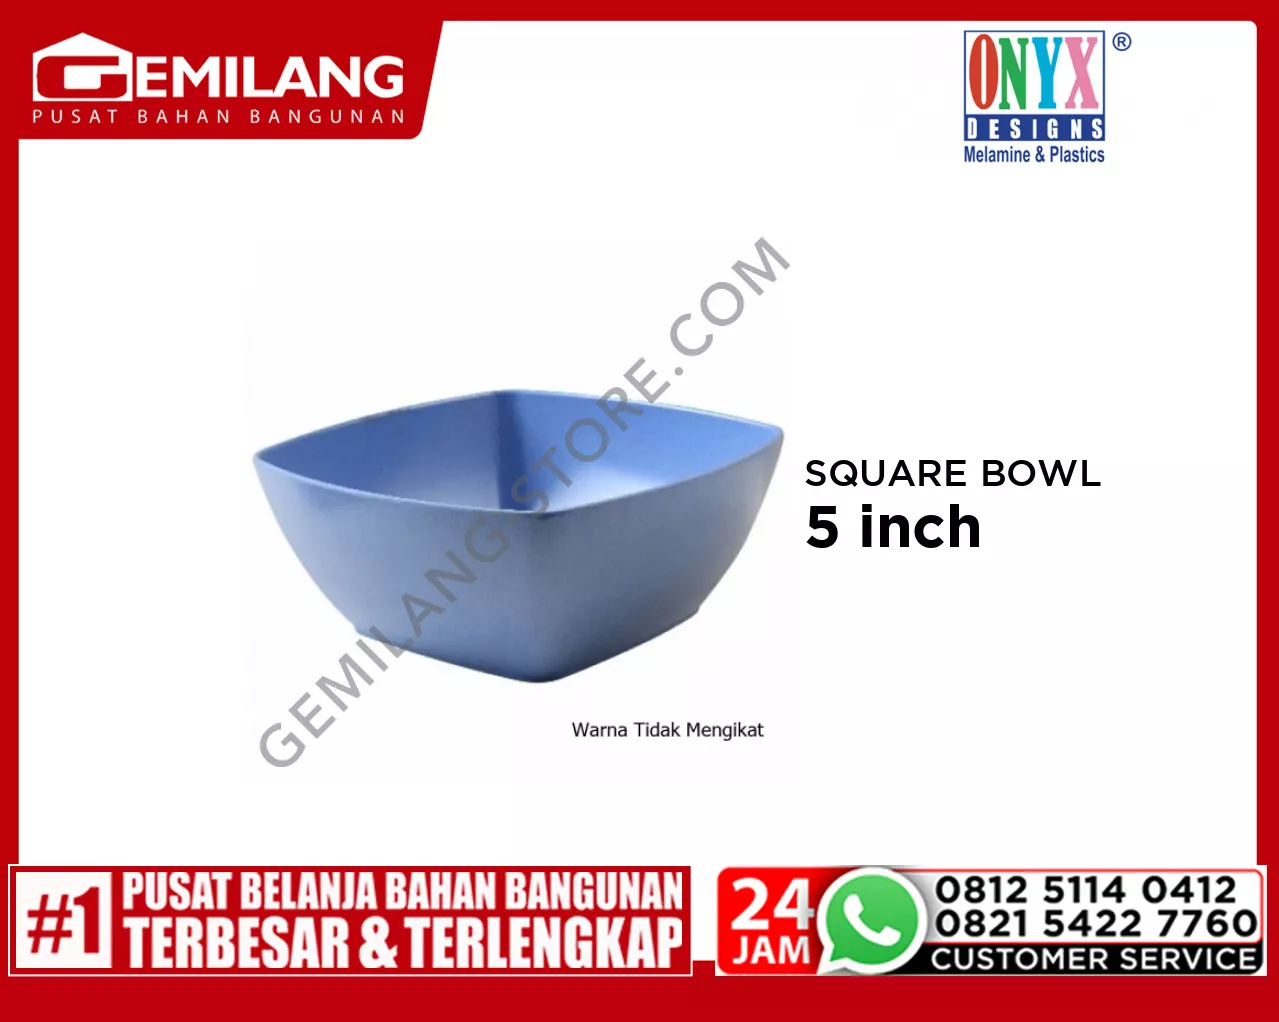 ONYX SQUARE BOWL GREEN EMERALD 2905.GES002 5inch